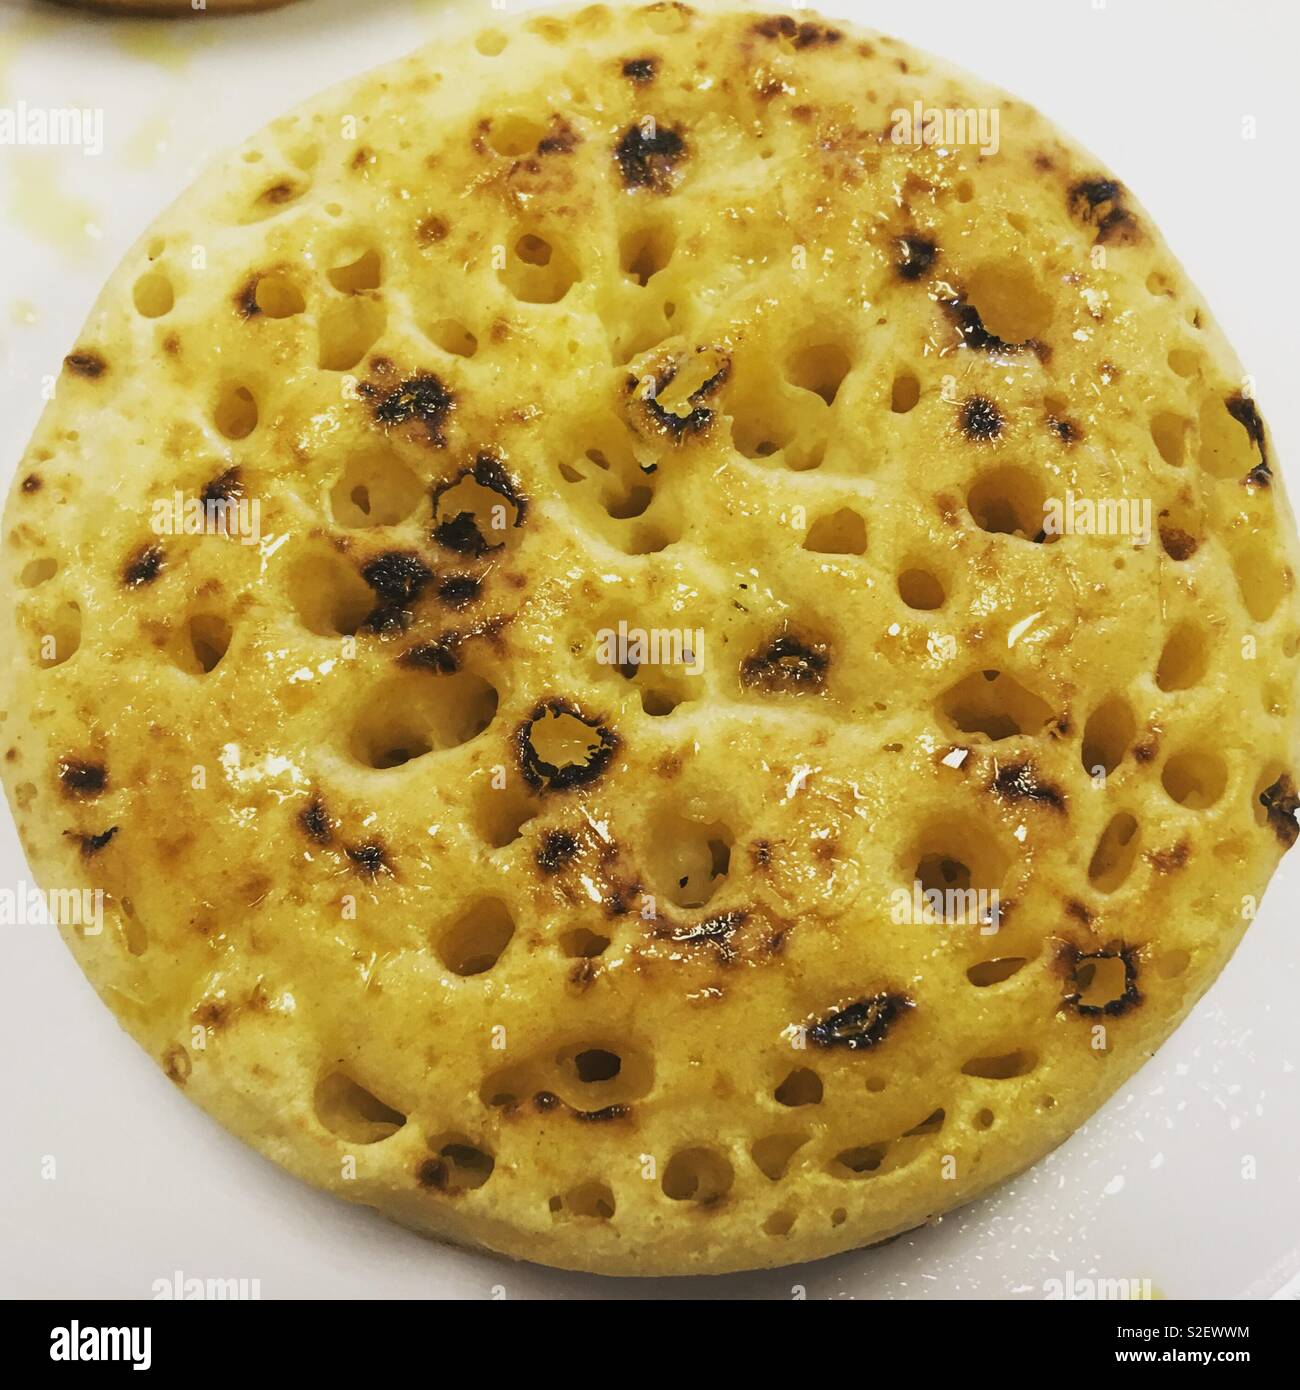 Hot buttered crumpet Stock Photo